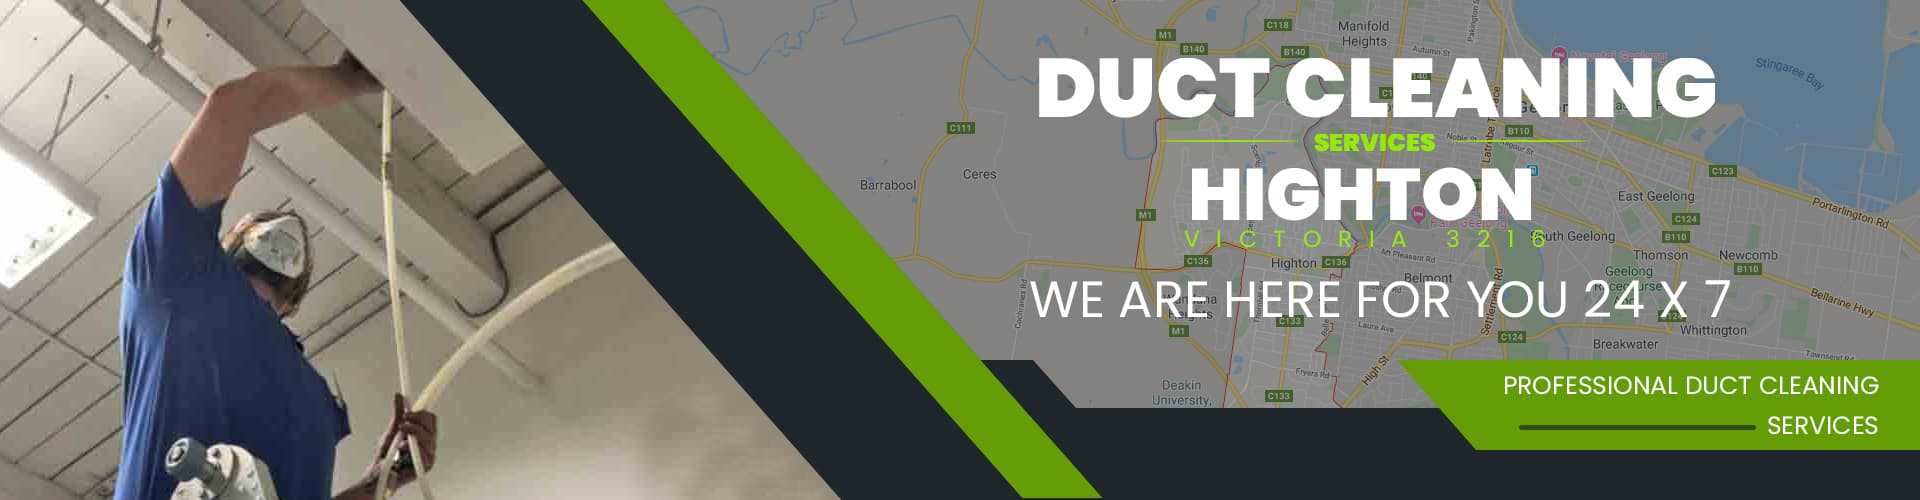 Duct Cleaning Highton